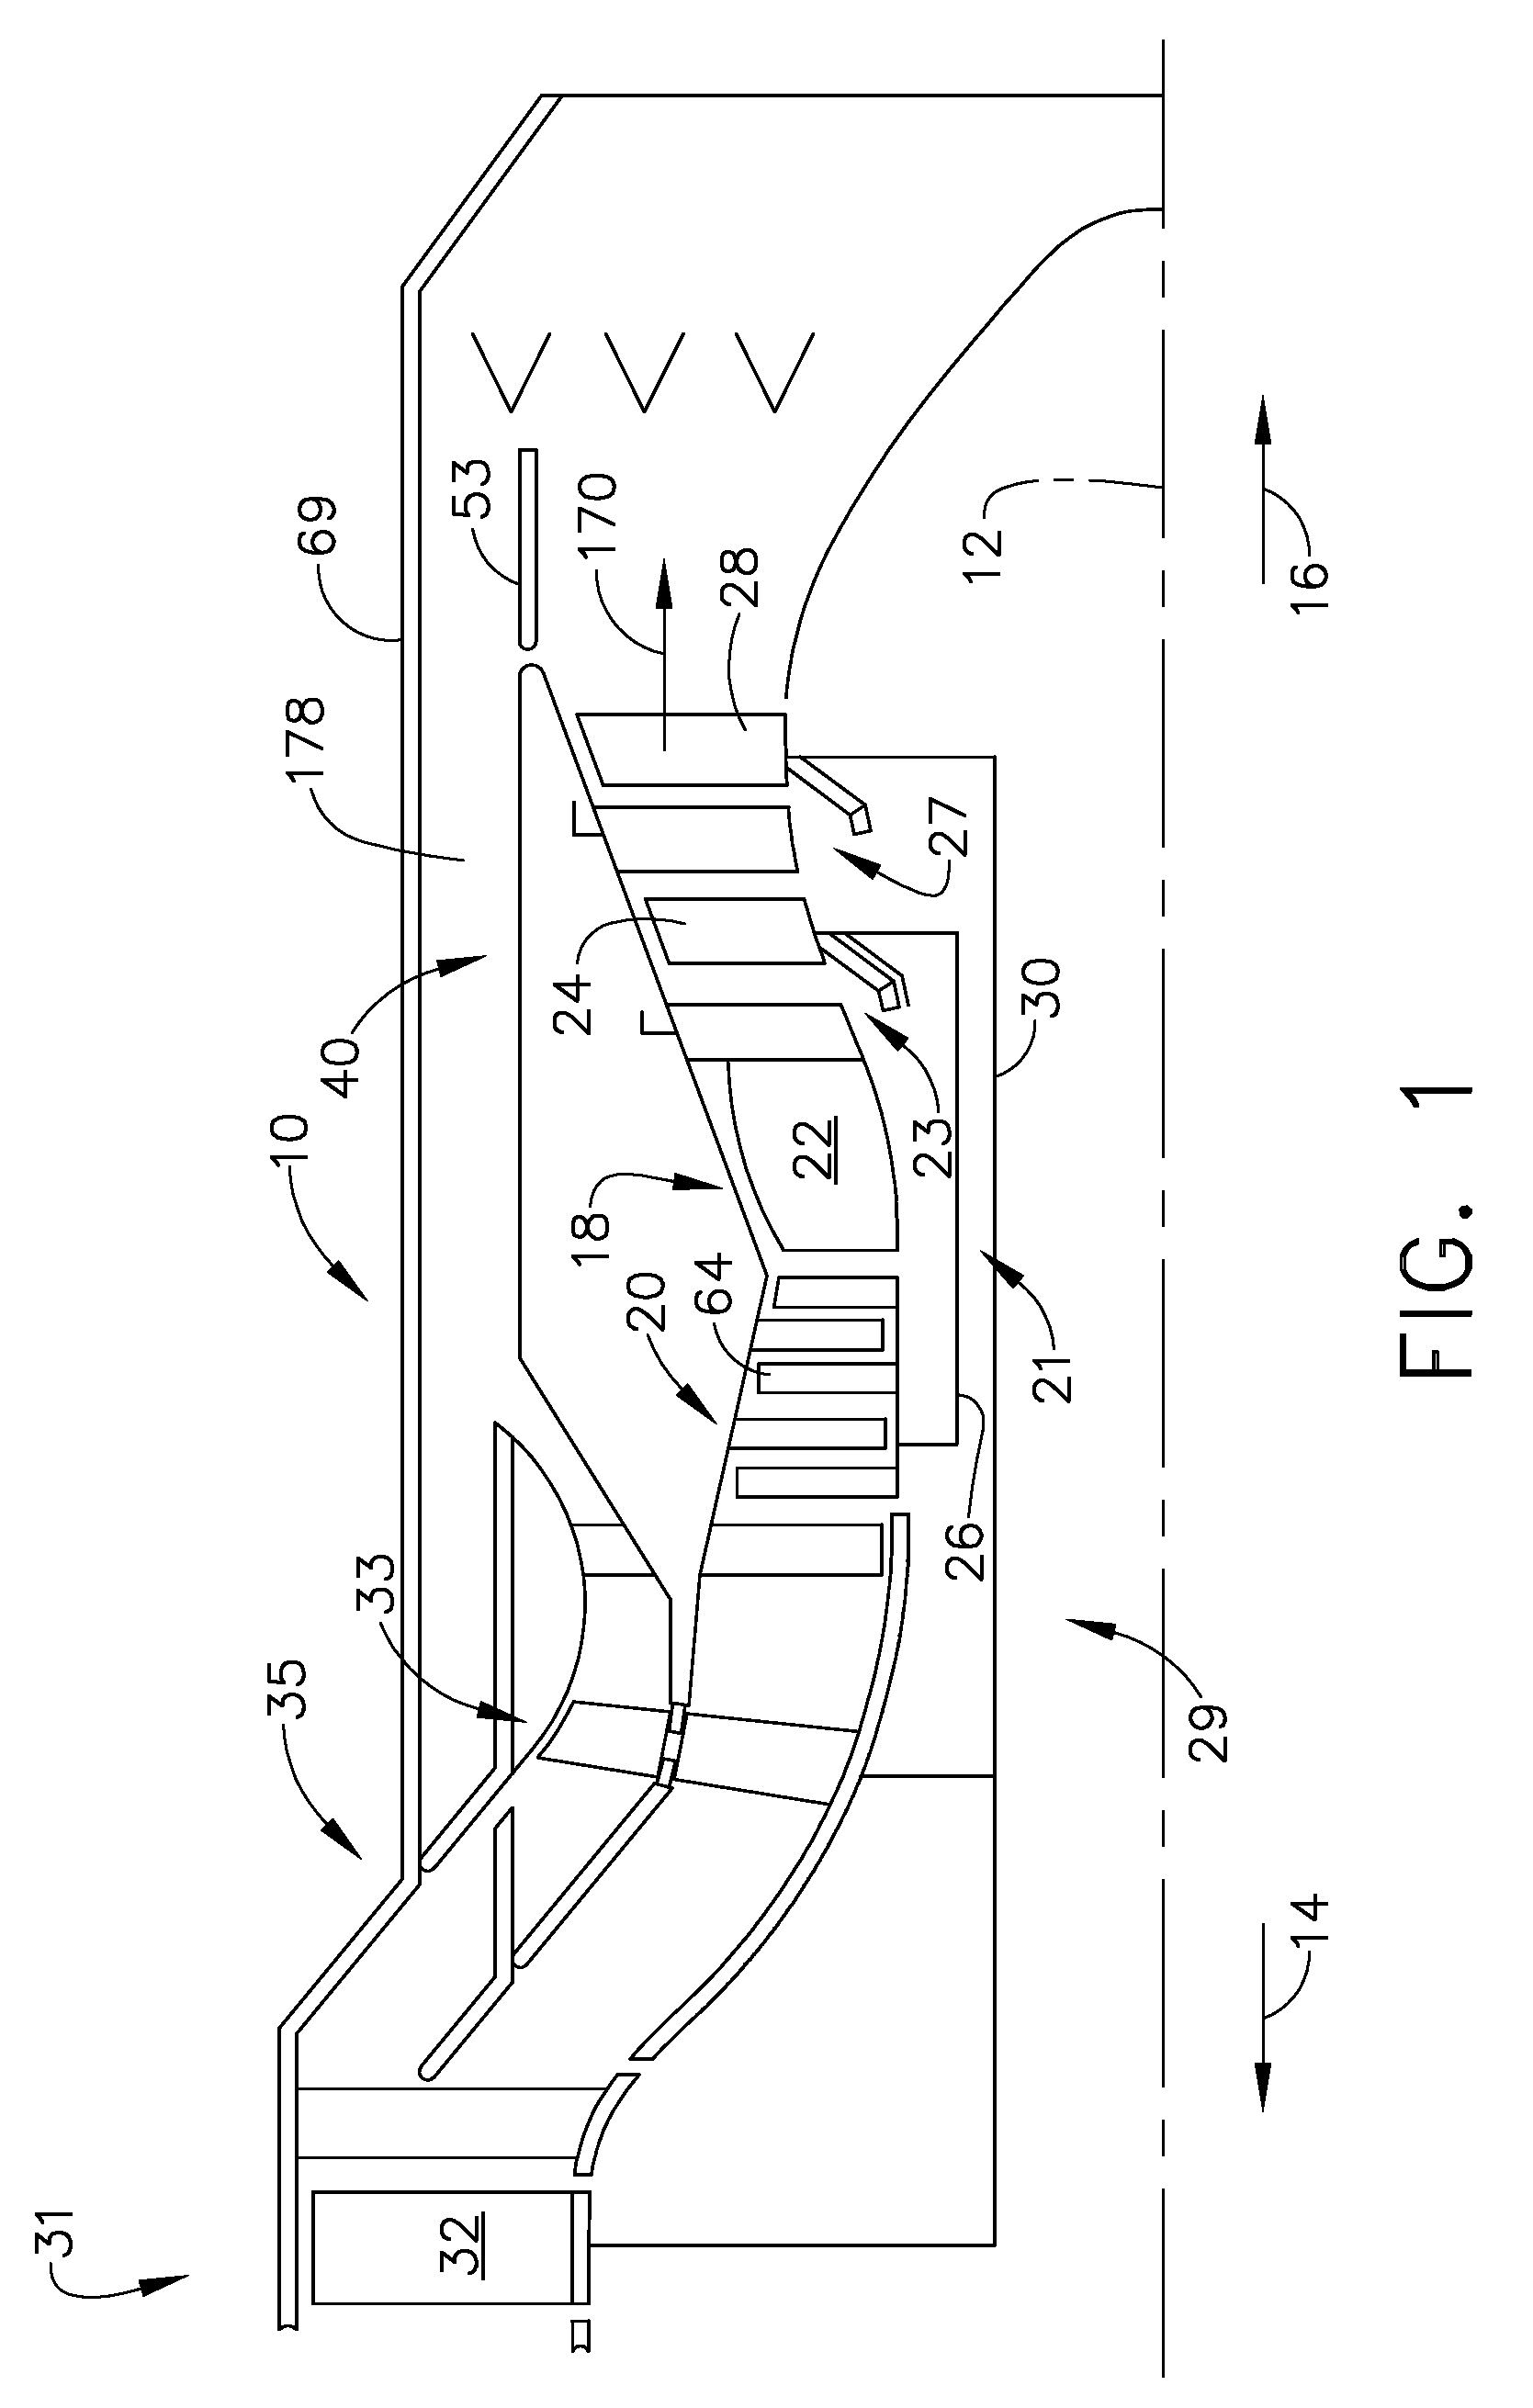 Variable coupling of turbofan engine spools via open differential gear set or simple planetary gear set for improved power extraction and engine operabiliby, with torque coupling for added flexability